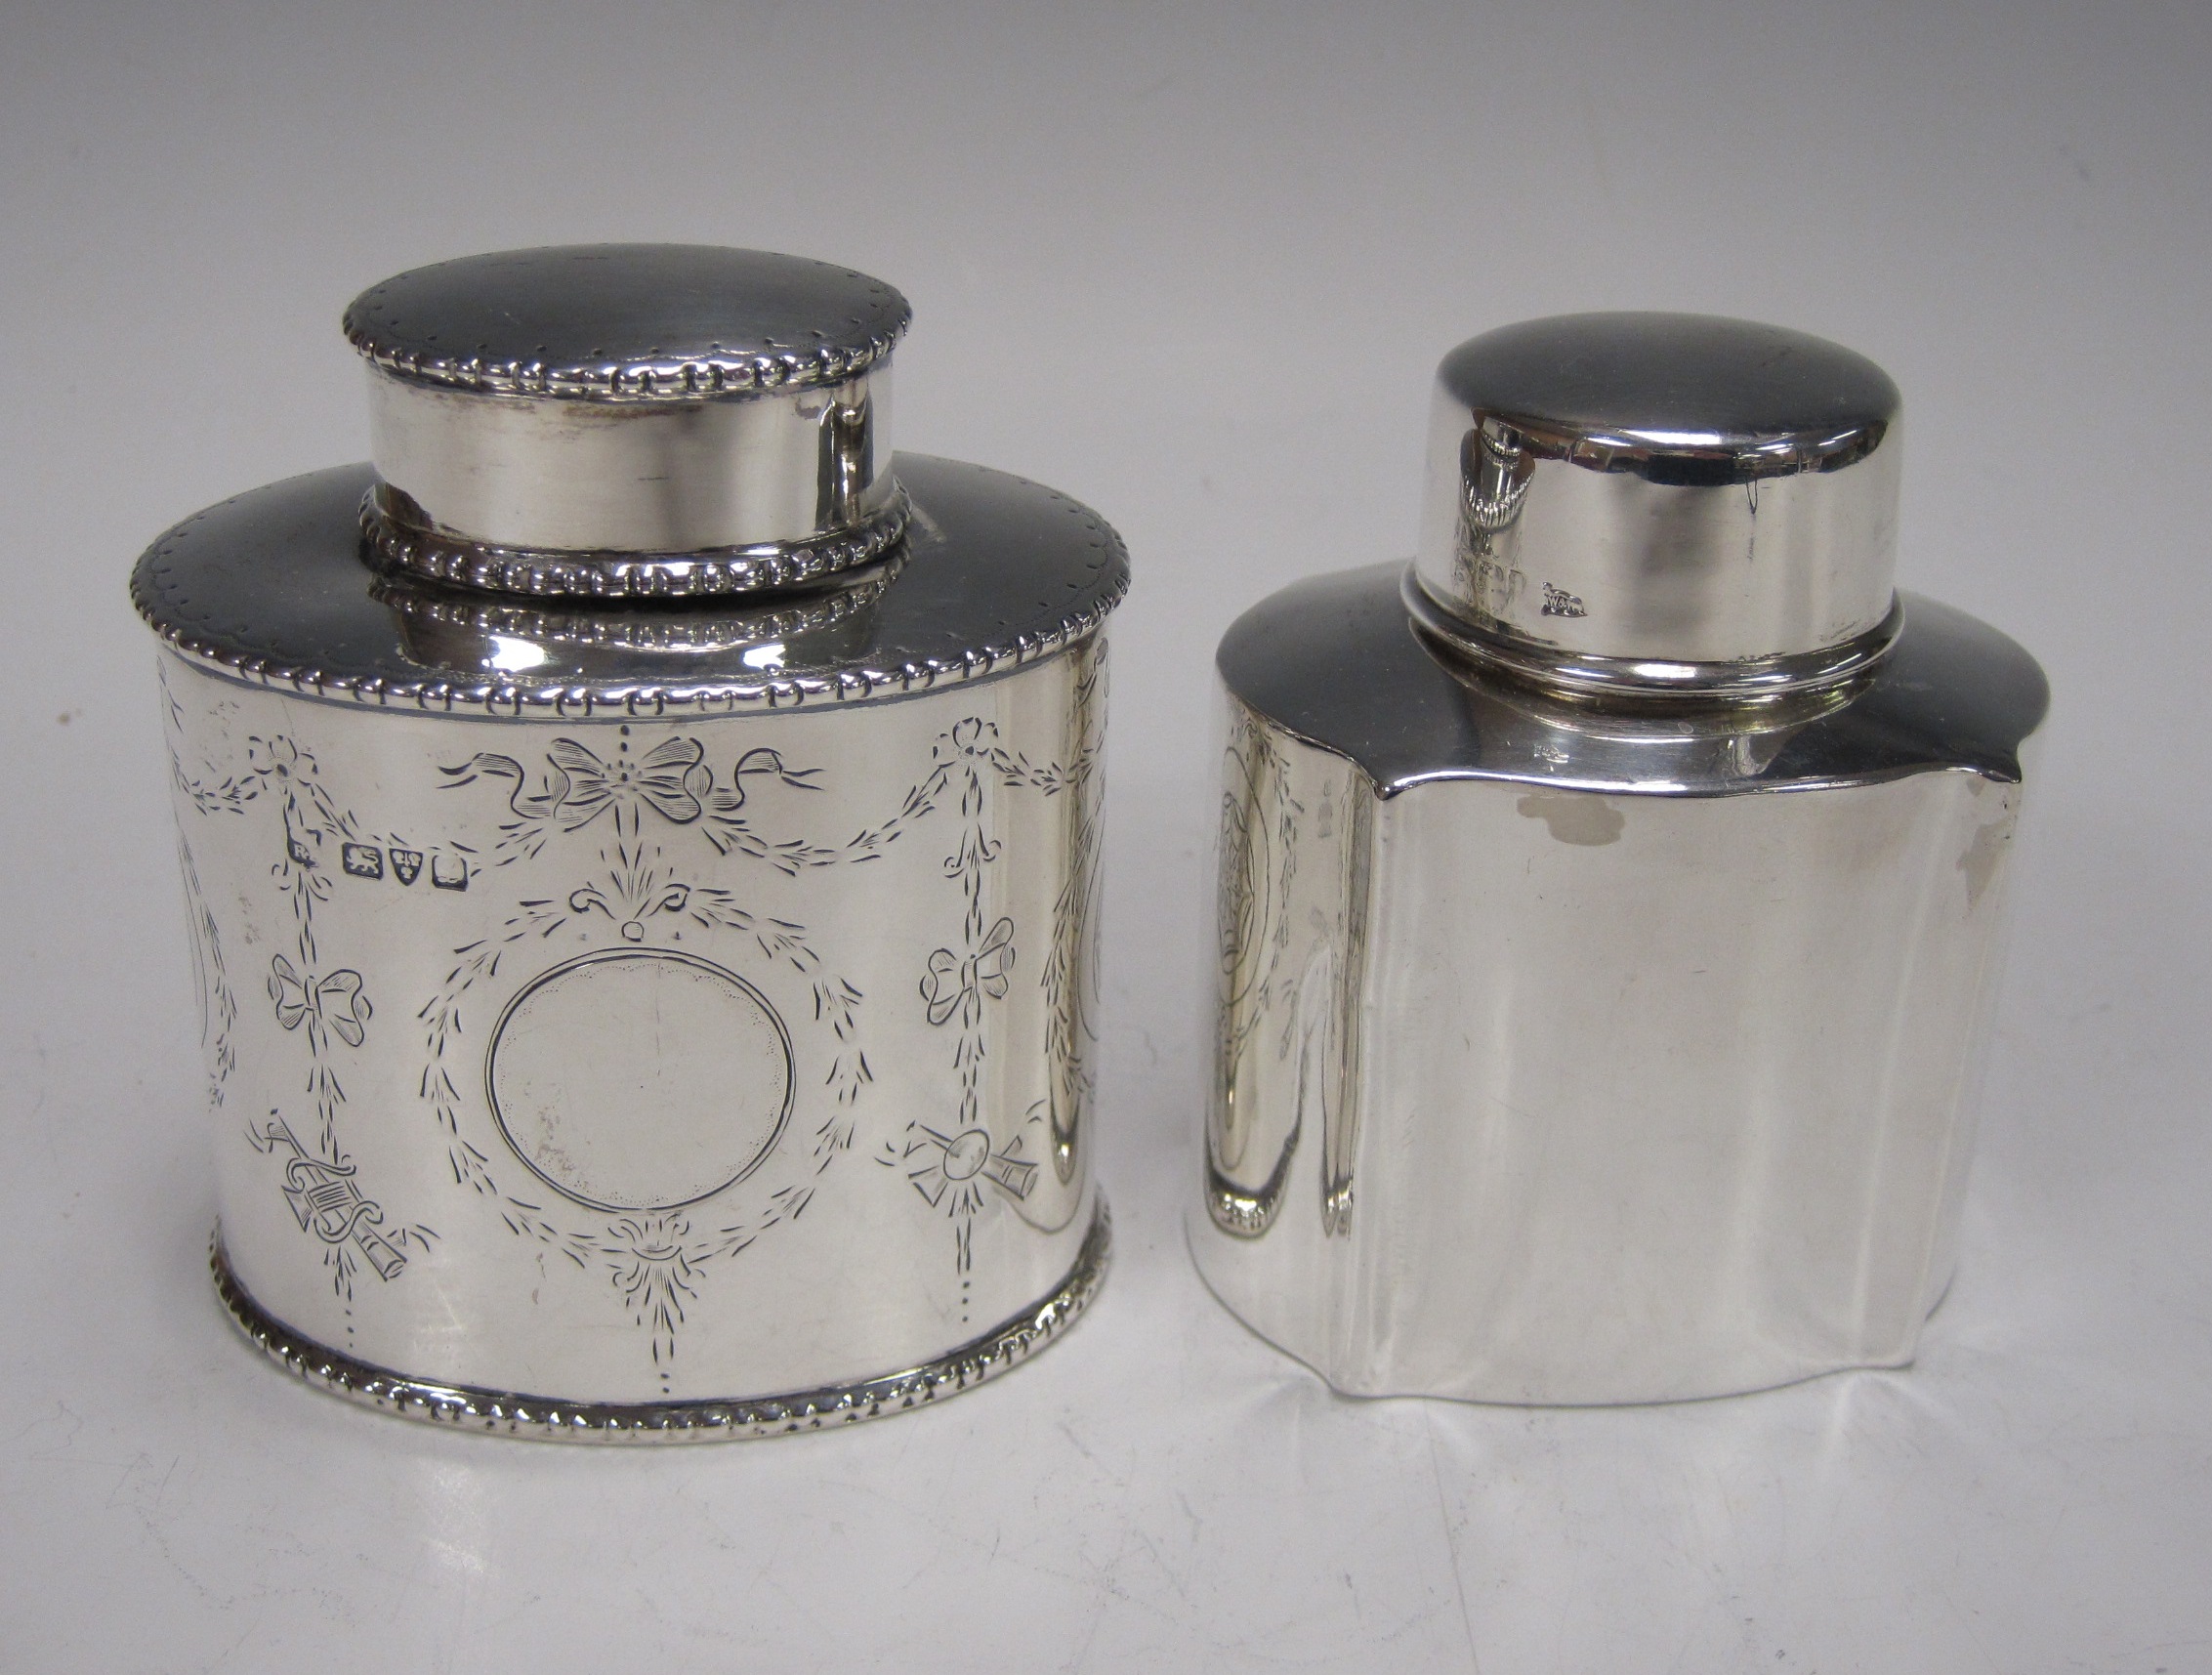 An oval silver Tea Caddy with swagged decoration, Chester 1911, and an Edward VII silver shaped